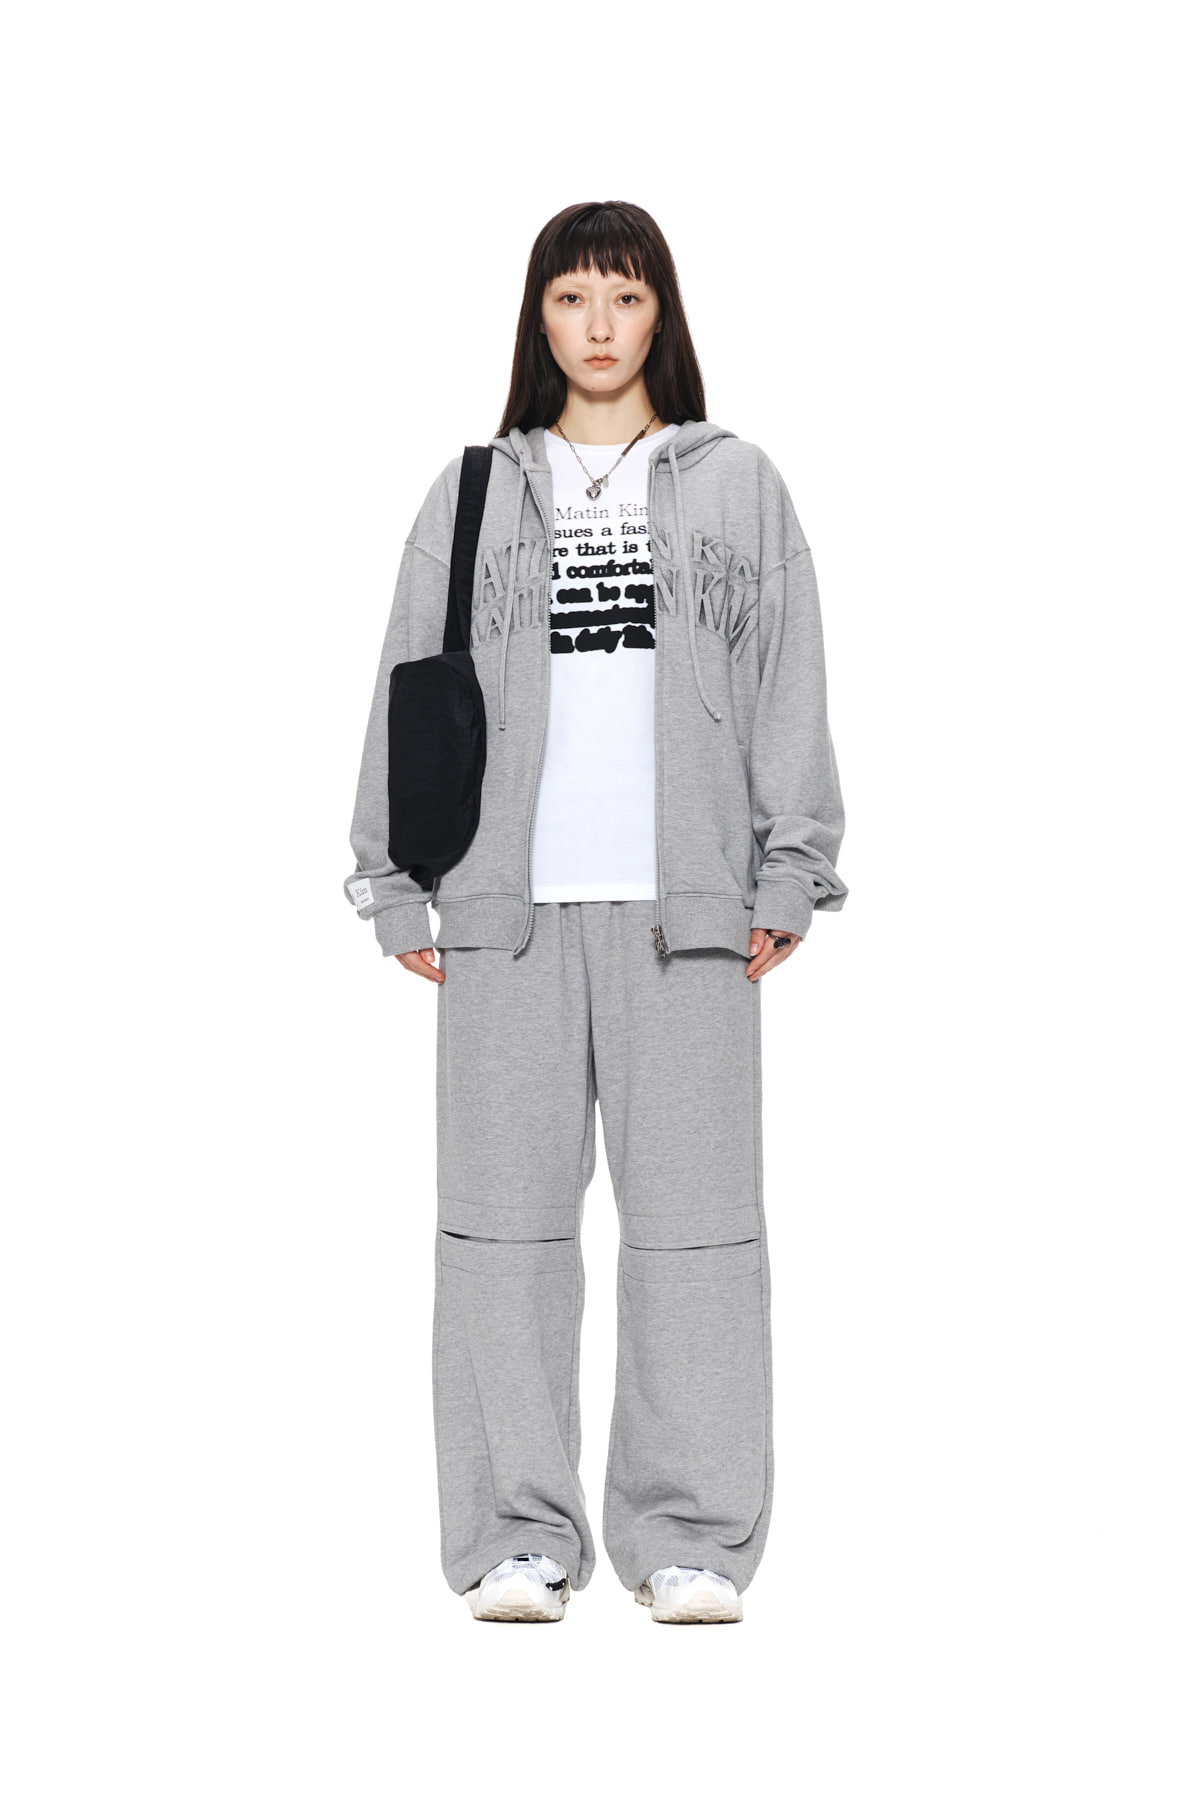 KNEE CUT OUT SWEATPANTS IN GREY